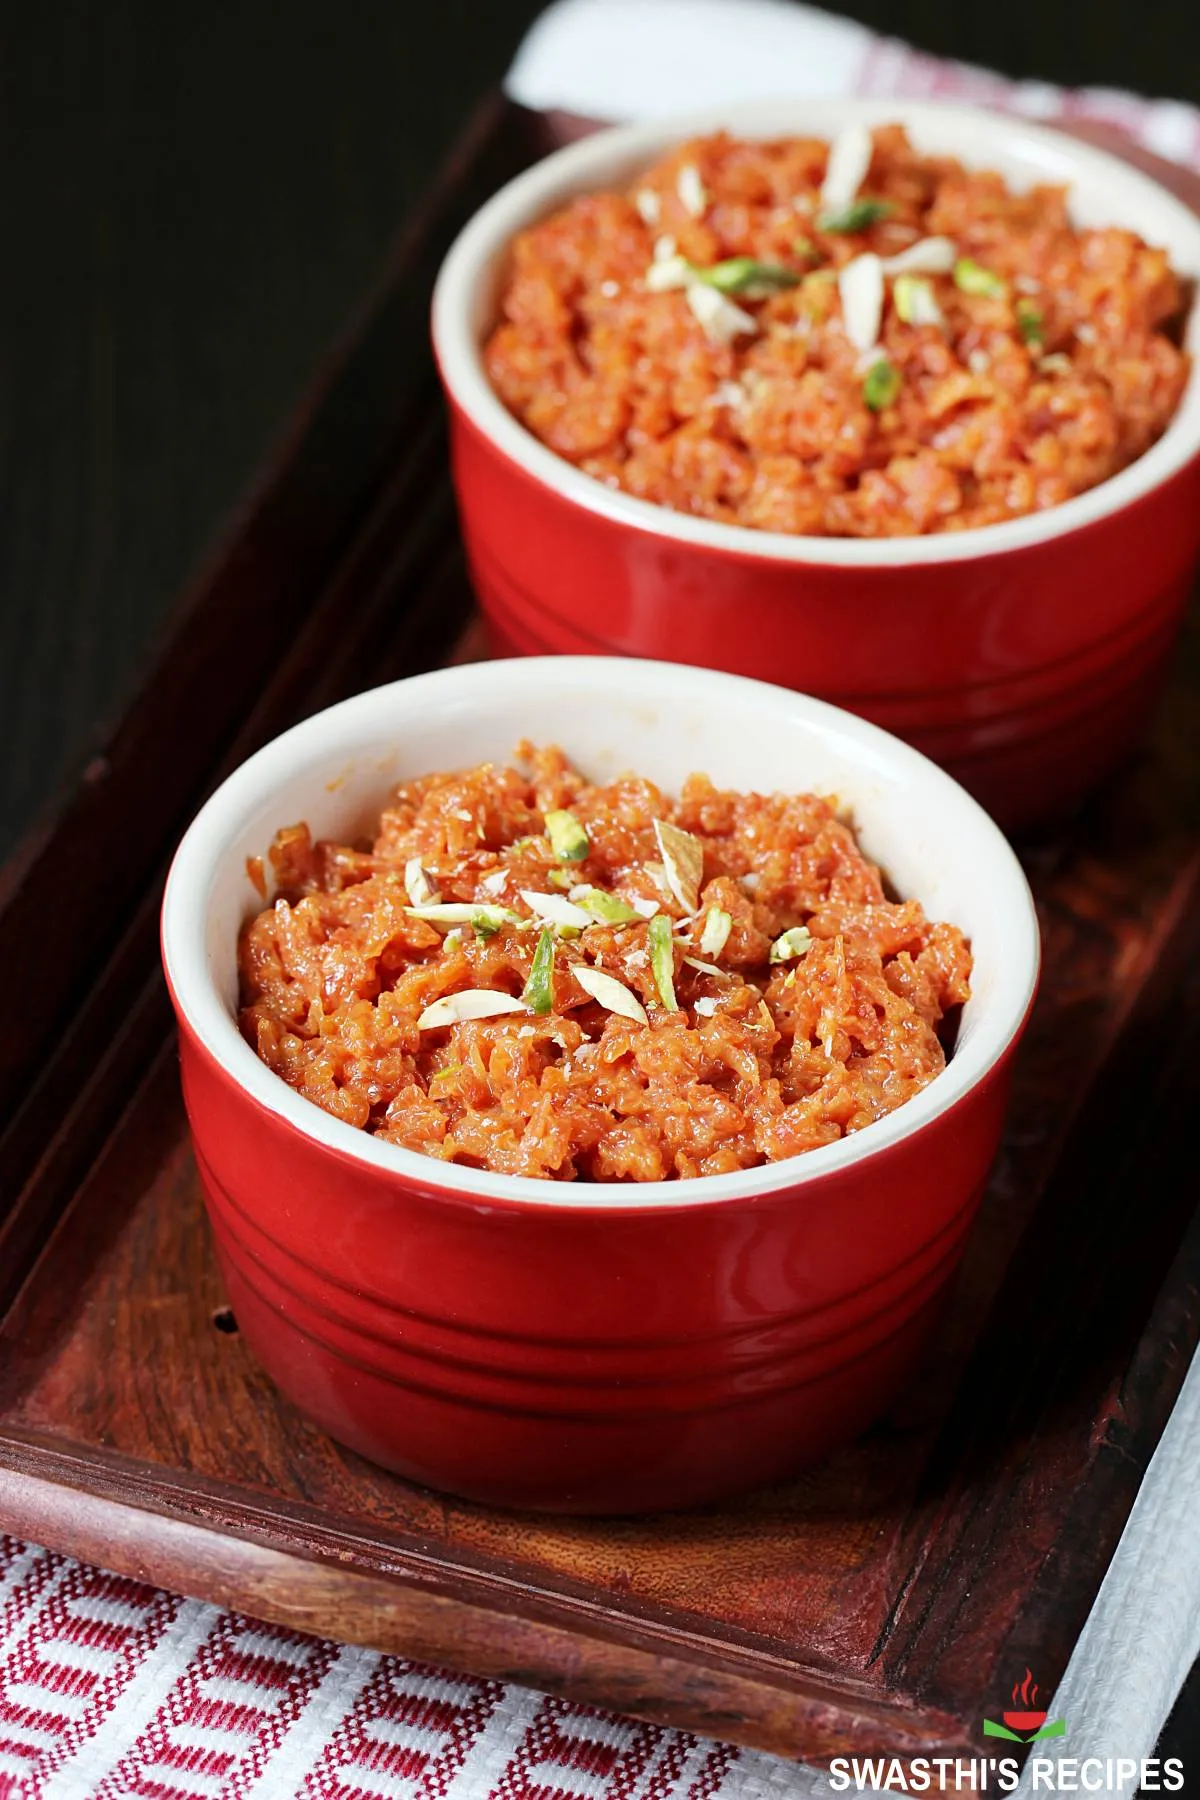 carrot halwa also known as gajar halwa served in a bowl with nuts